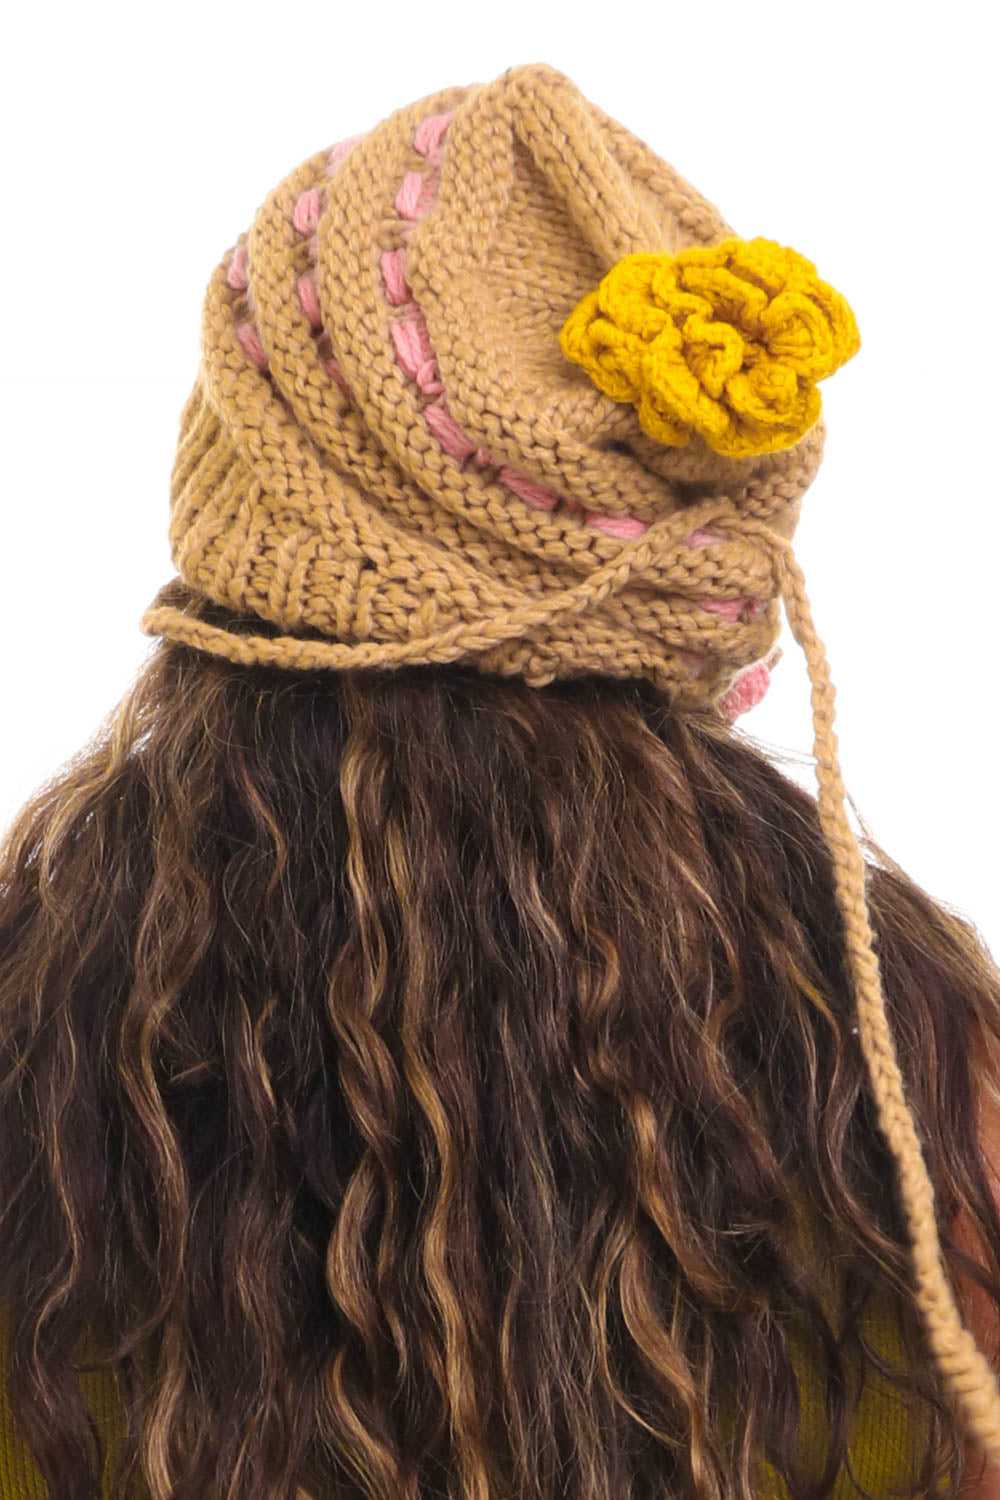 Vintage Flower Power Knitted Beanie - image 5